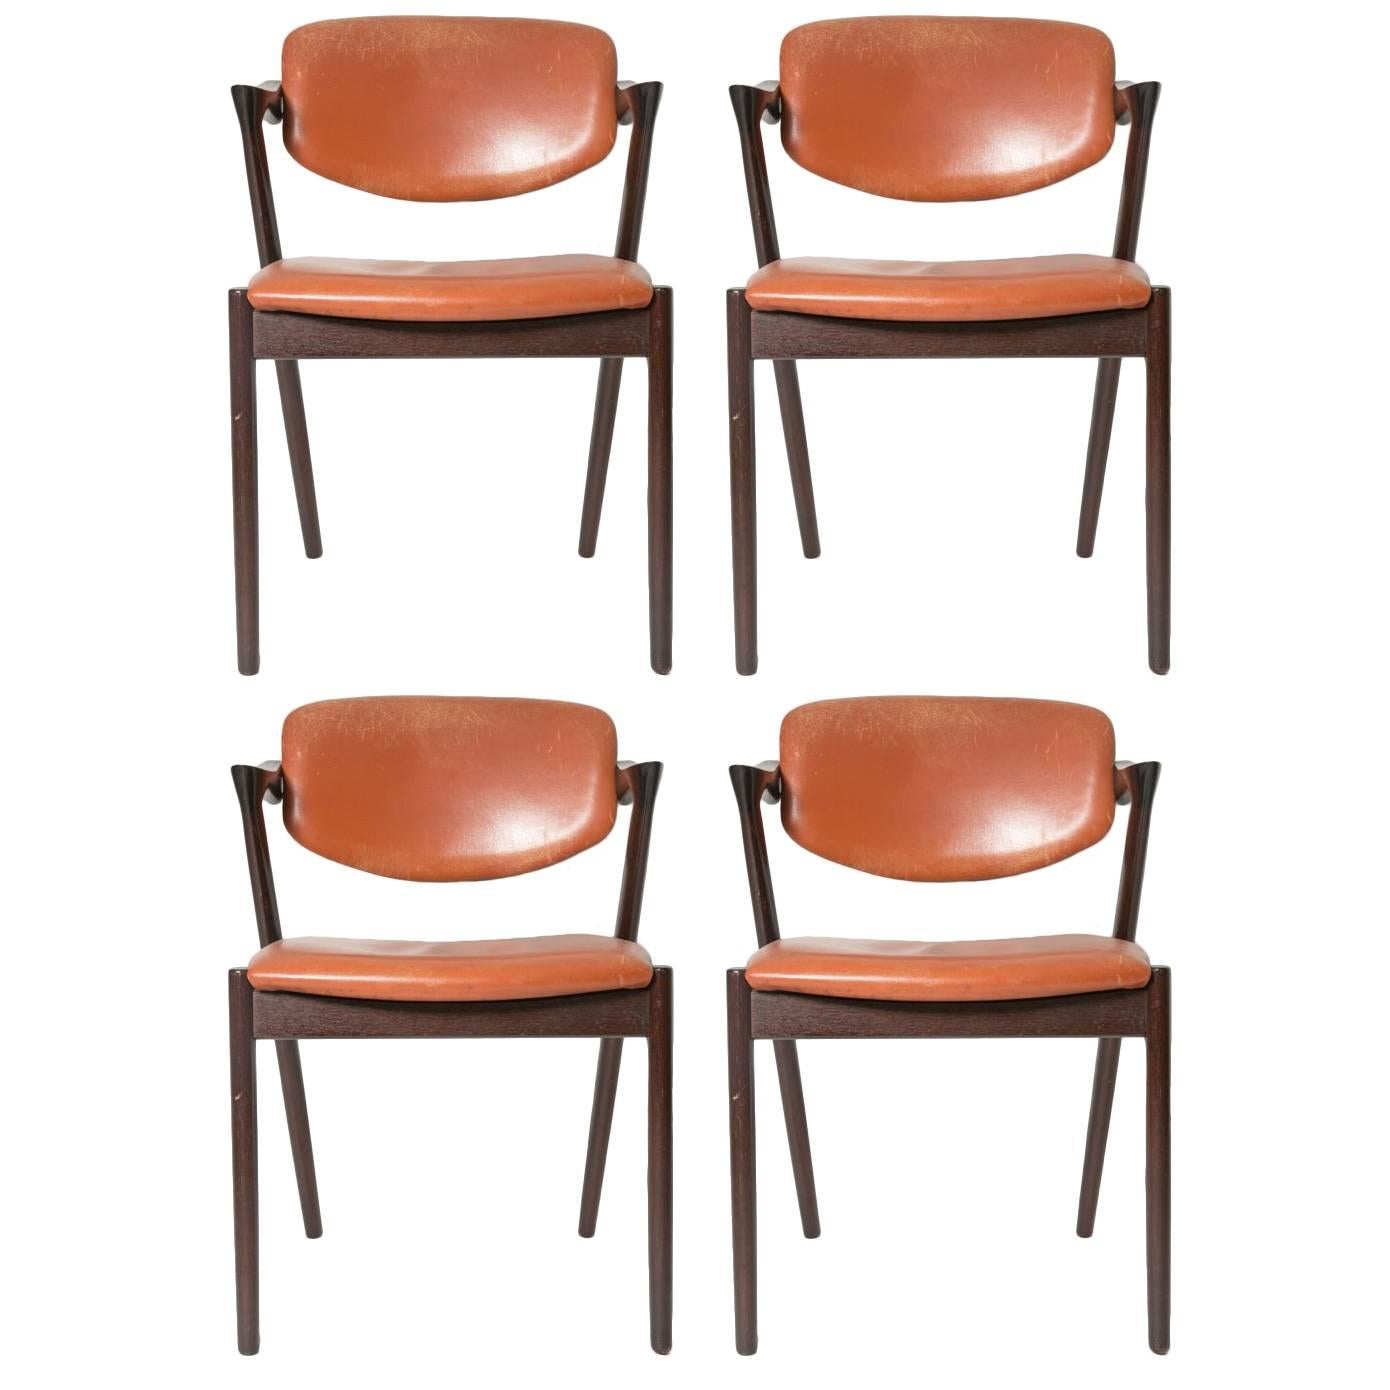 Four Kai Kristiansen Cognac Leather and Mahogany 'Z' Dining Chairs